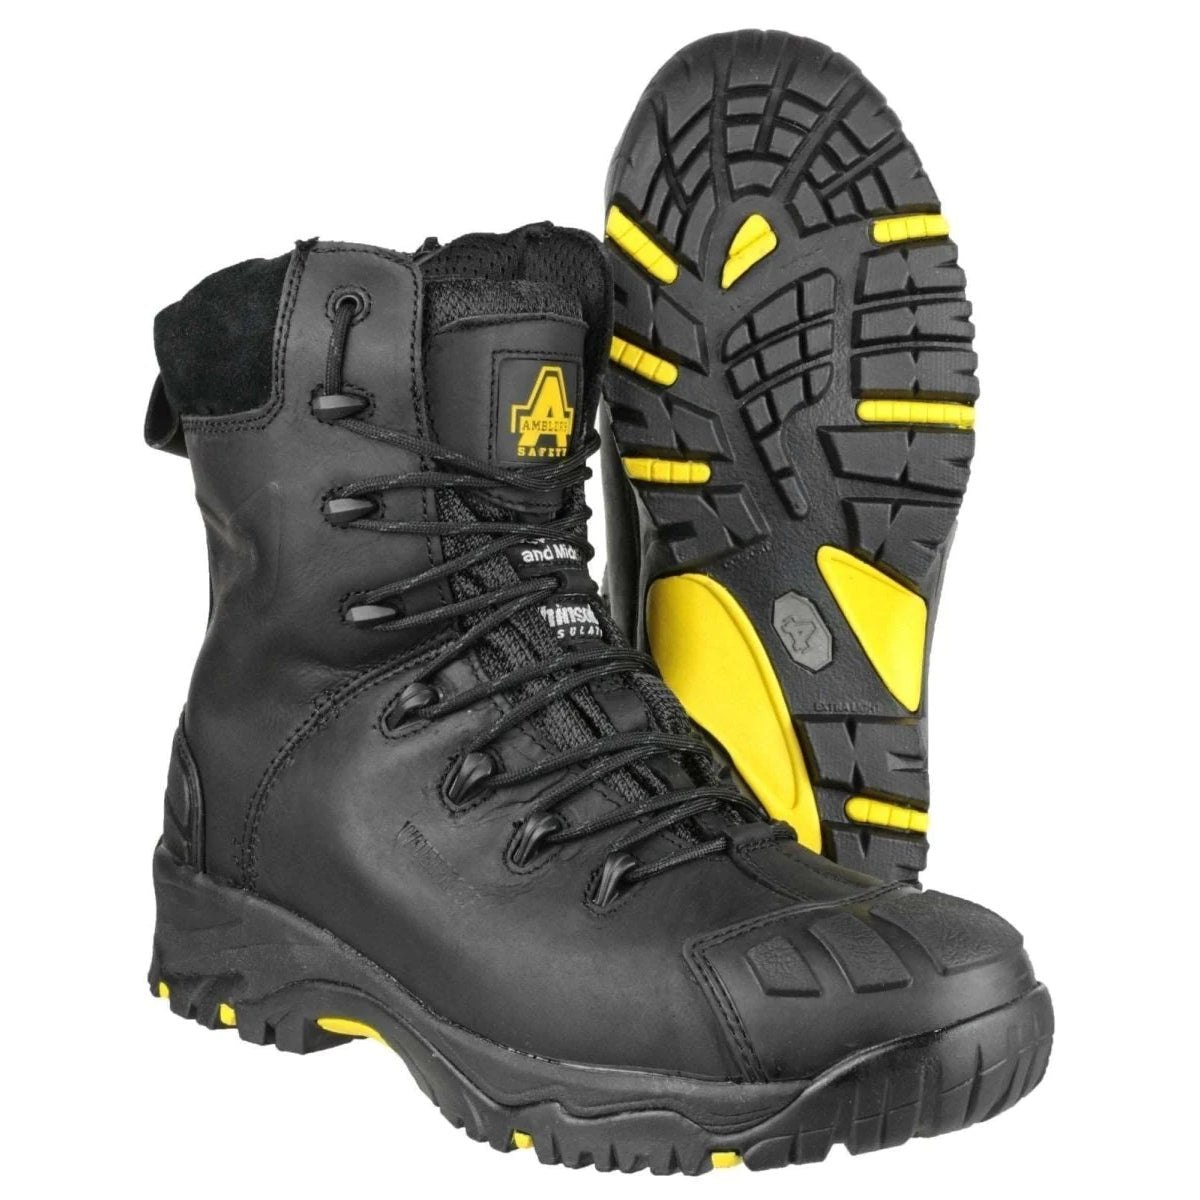 Amblers FS999 S3 Rugged Waterproof Safety Boots - Shoe Store Direct